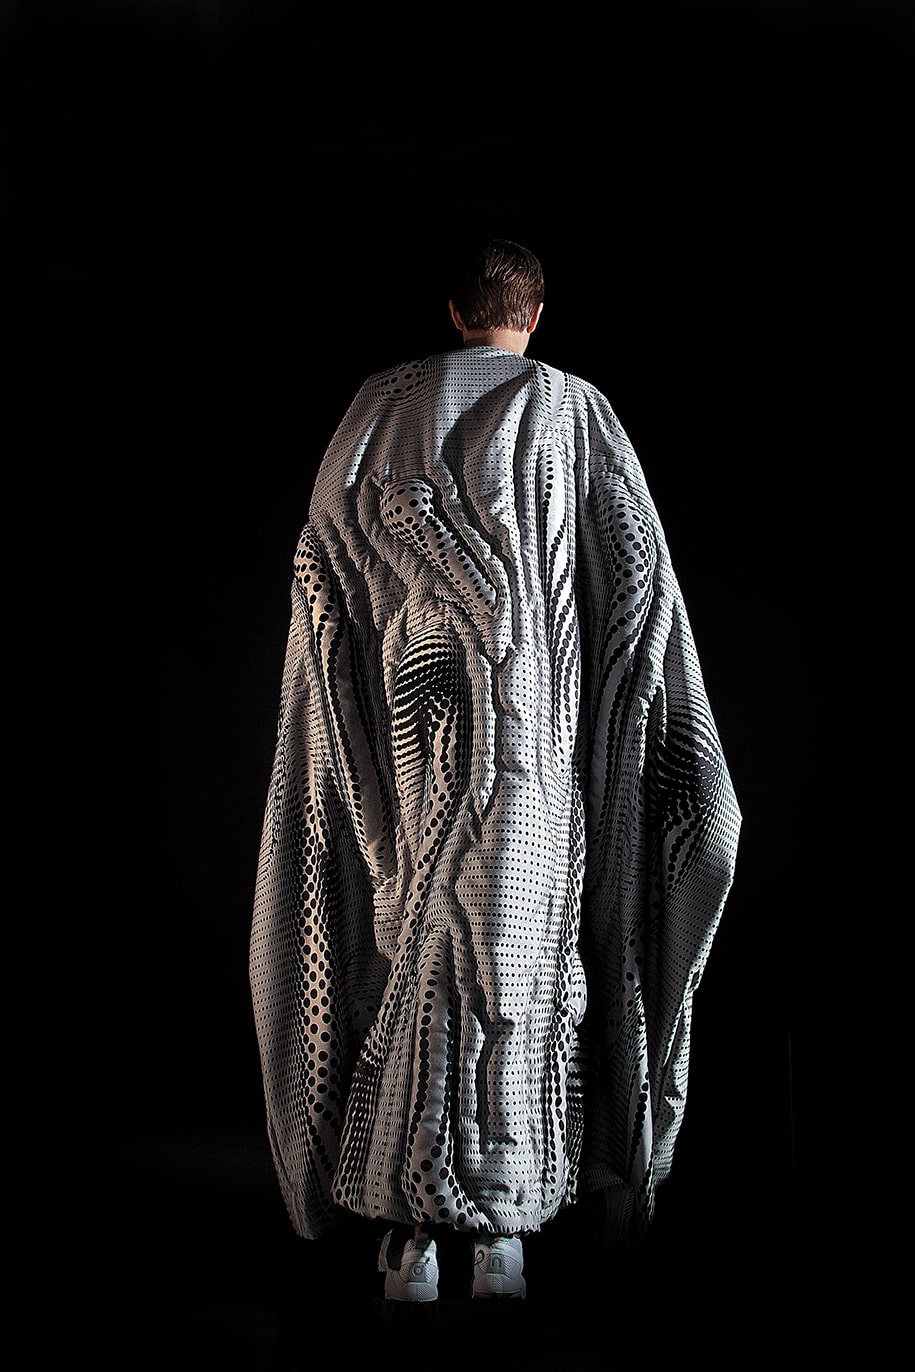 Archisearch CHBL Jammer Coat by COOP HIMMELB(L)AU enables its user to digitally disappear